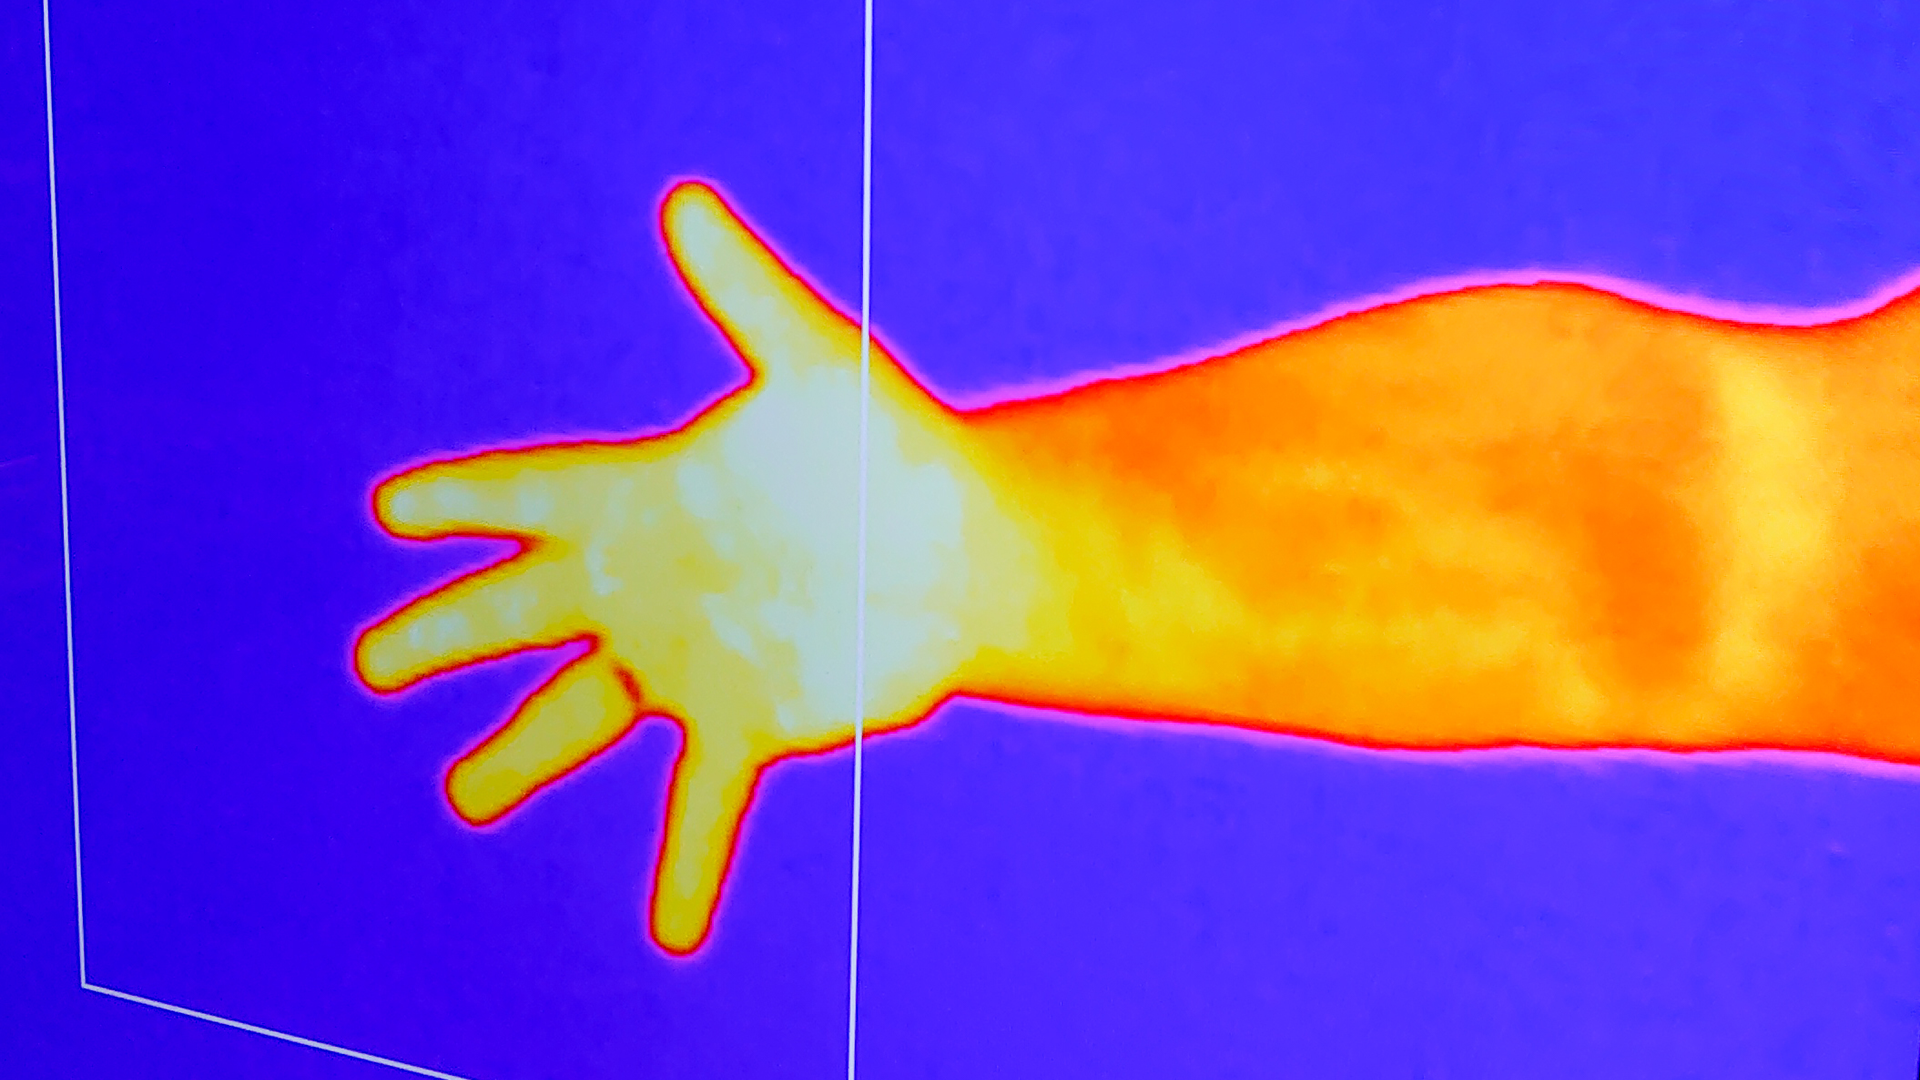 An arm and hand as viewed using an infra-red camera